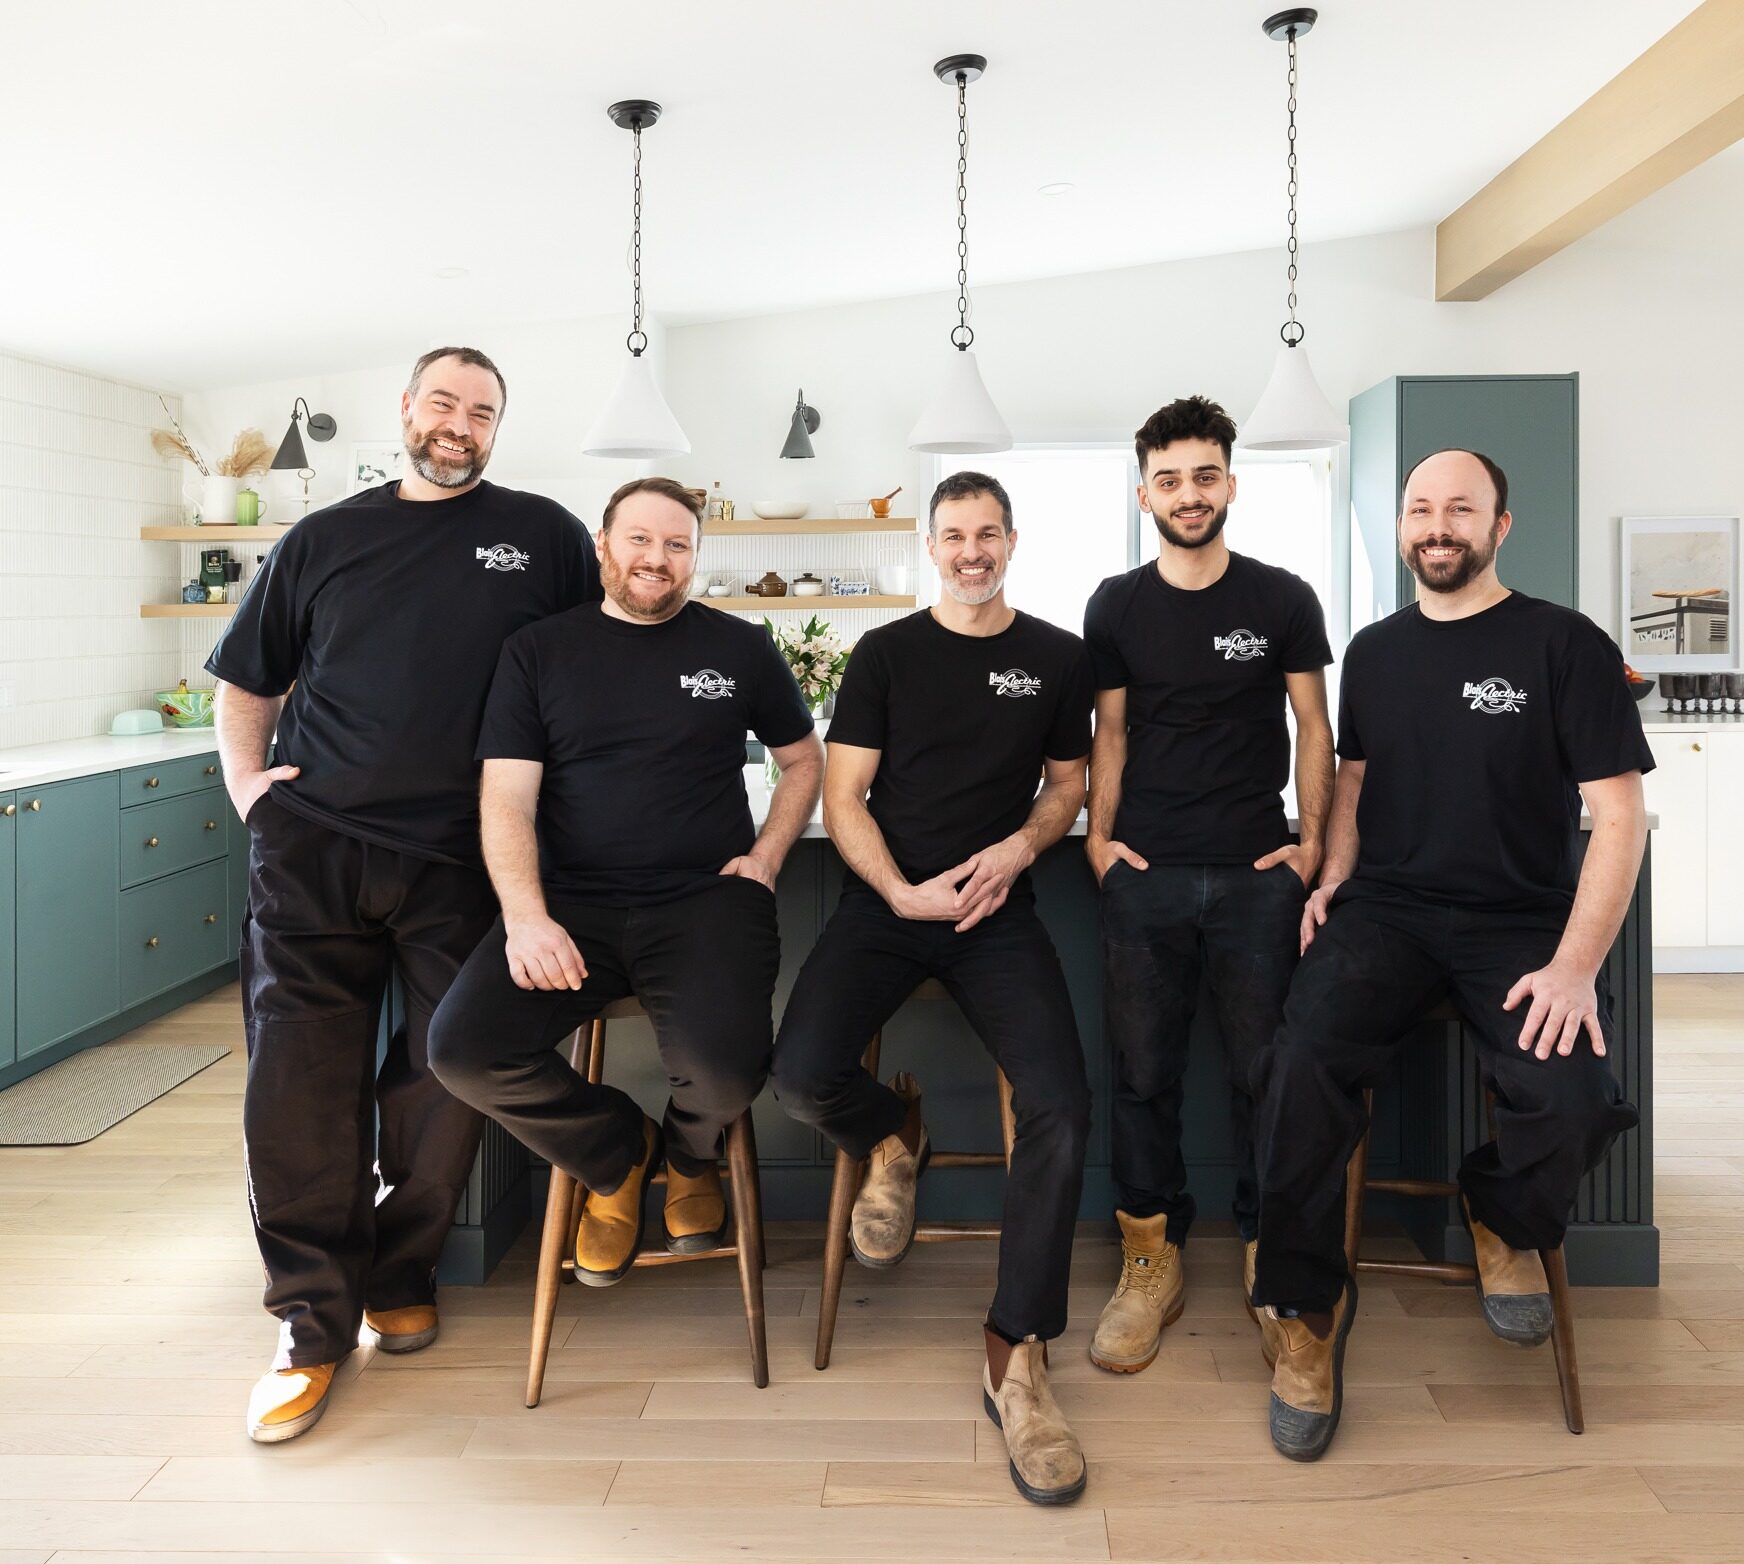 Five people wearing black shirts with matching logos pose smiling in a bright kitchen with teal cabinets, pendant lights, and a wooden counter.